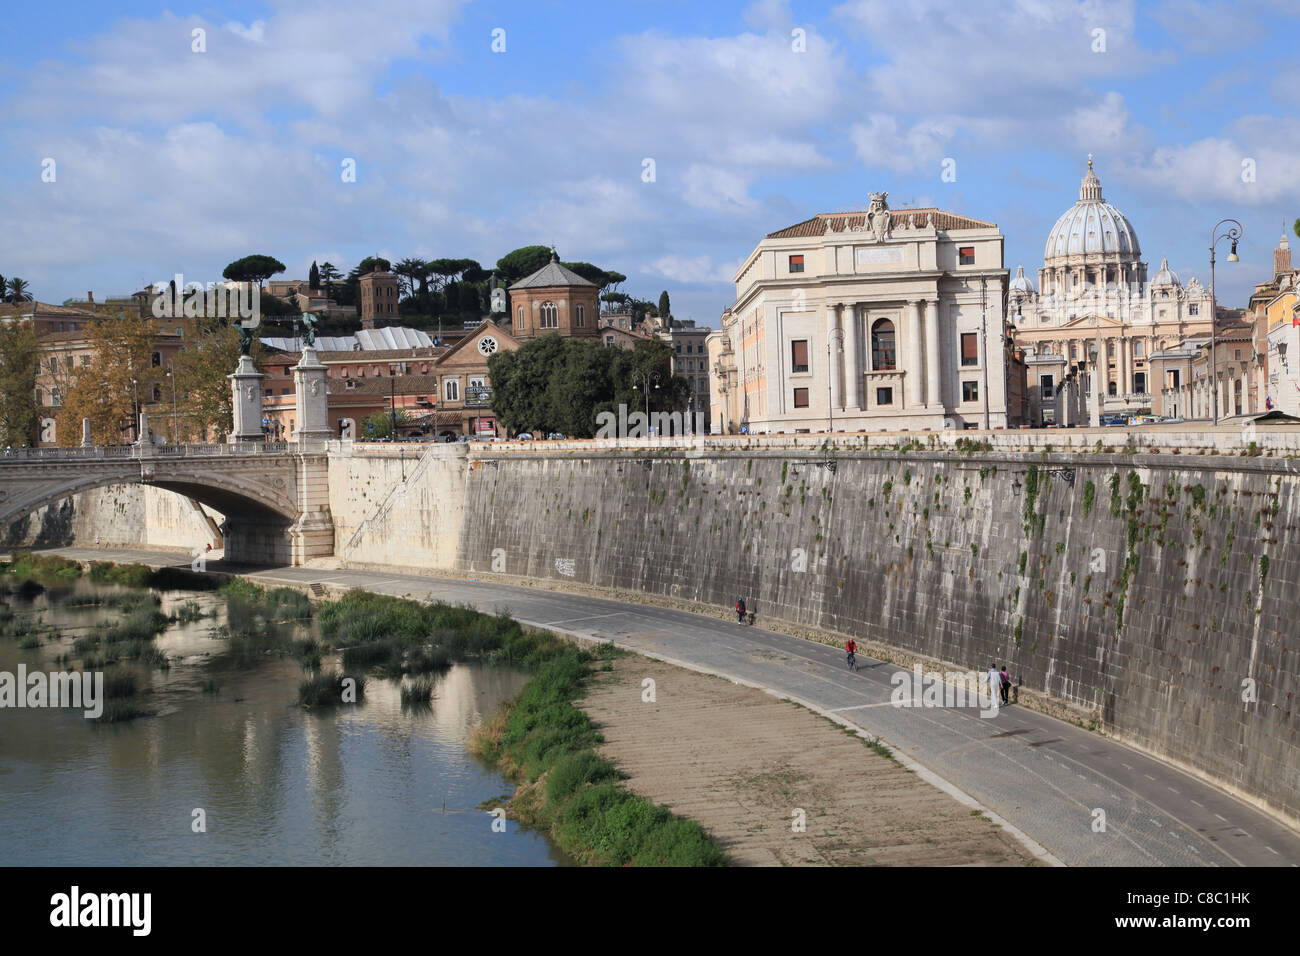 Rome Skyline looking over the Tiber River, with Dome of St. Peter's Basilica in the background, and recreational path Stock Photo